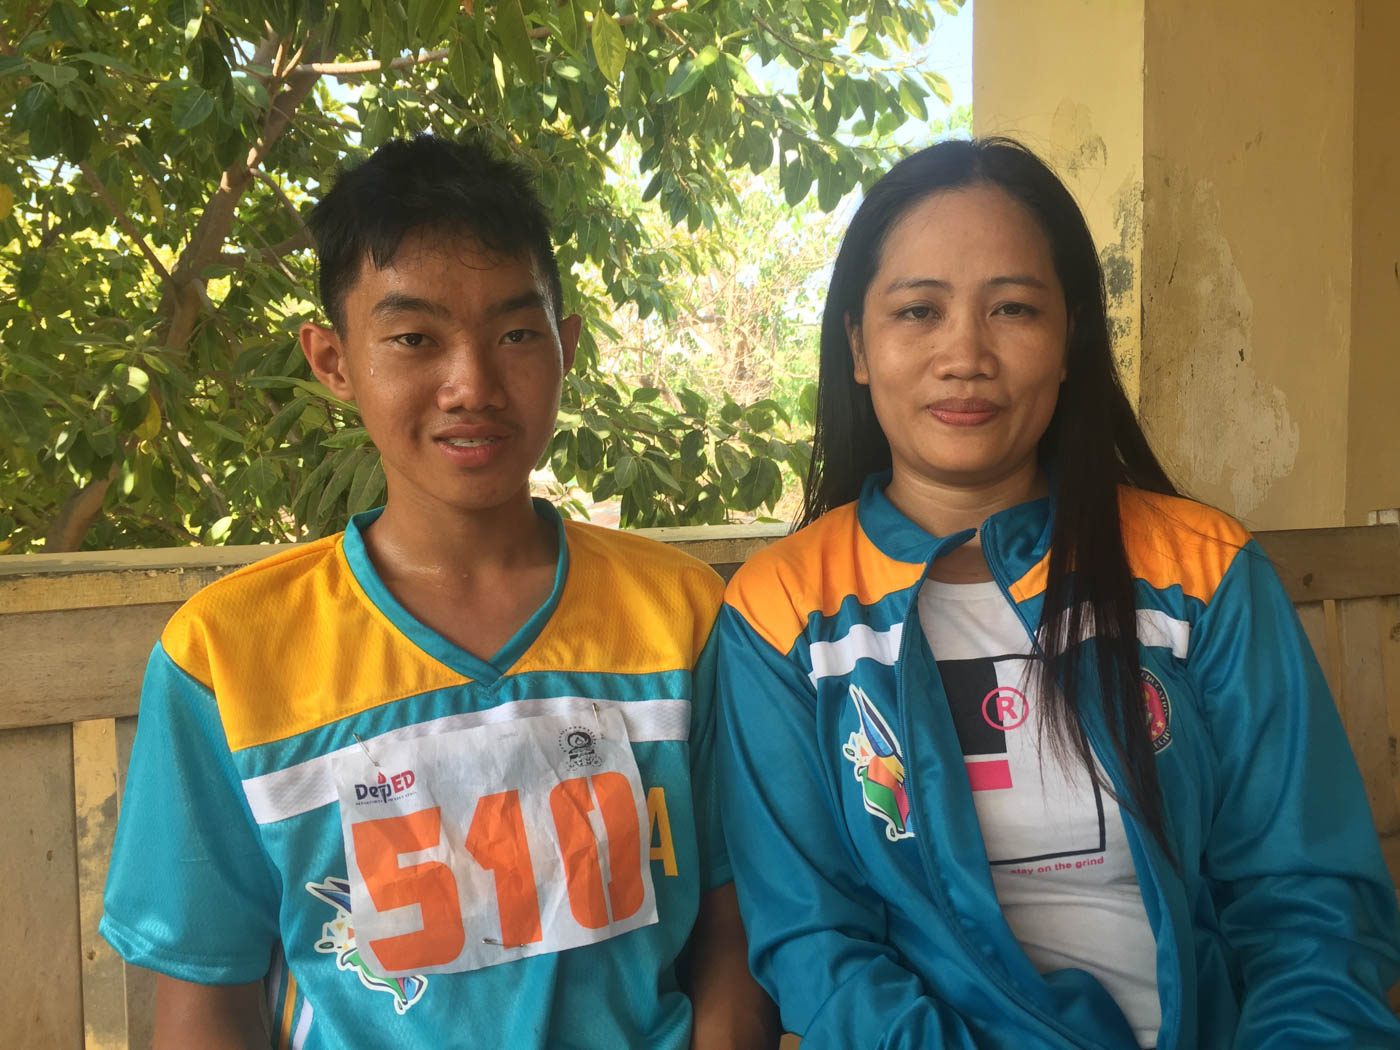 ATHLETE AND COACH. Leo Lee and Mary Jane are looking to train harder for next year's Palarong Pambansa. Photo by Mara Cepeda/Rappler 